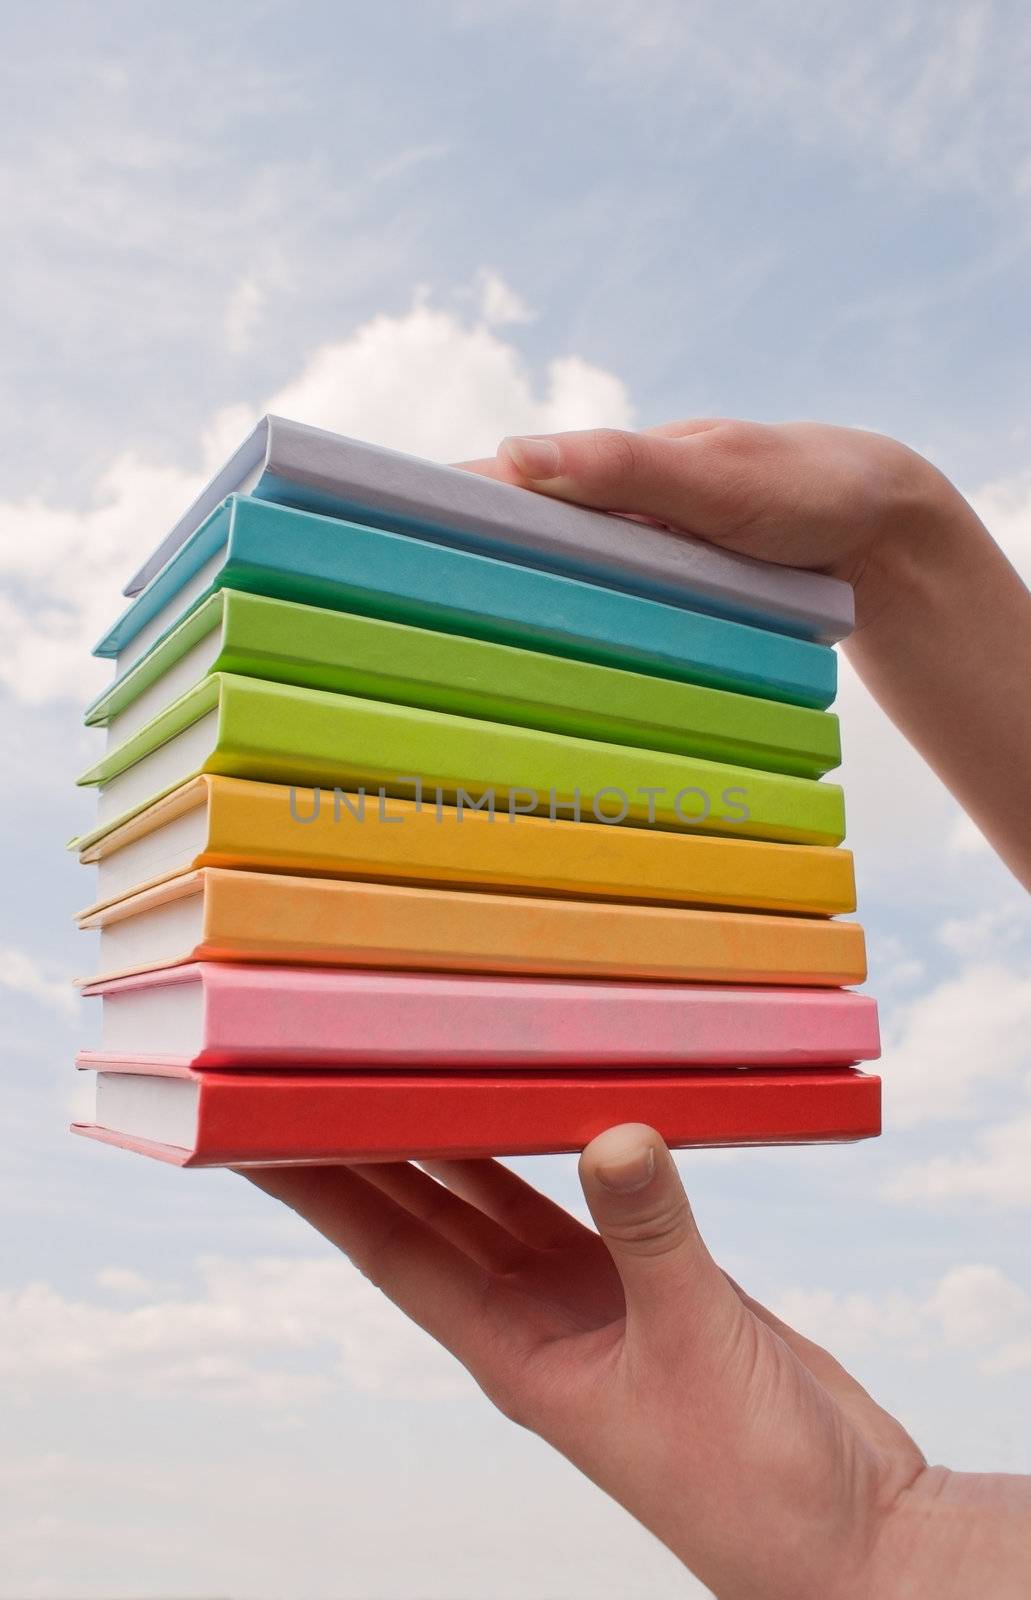 Hands holding color hard cover books